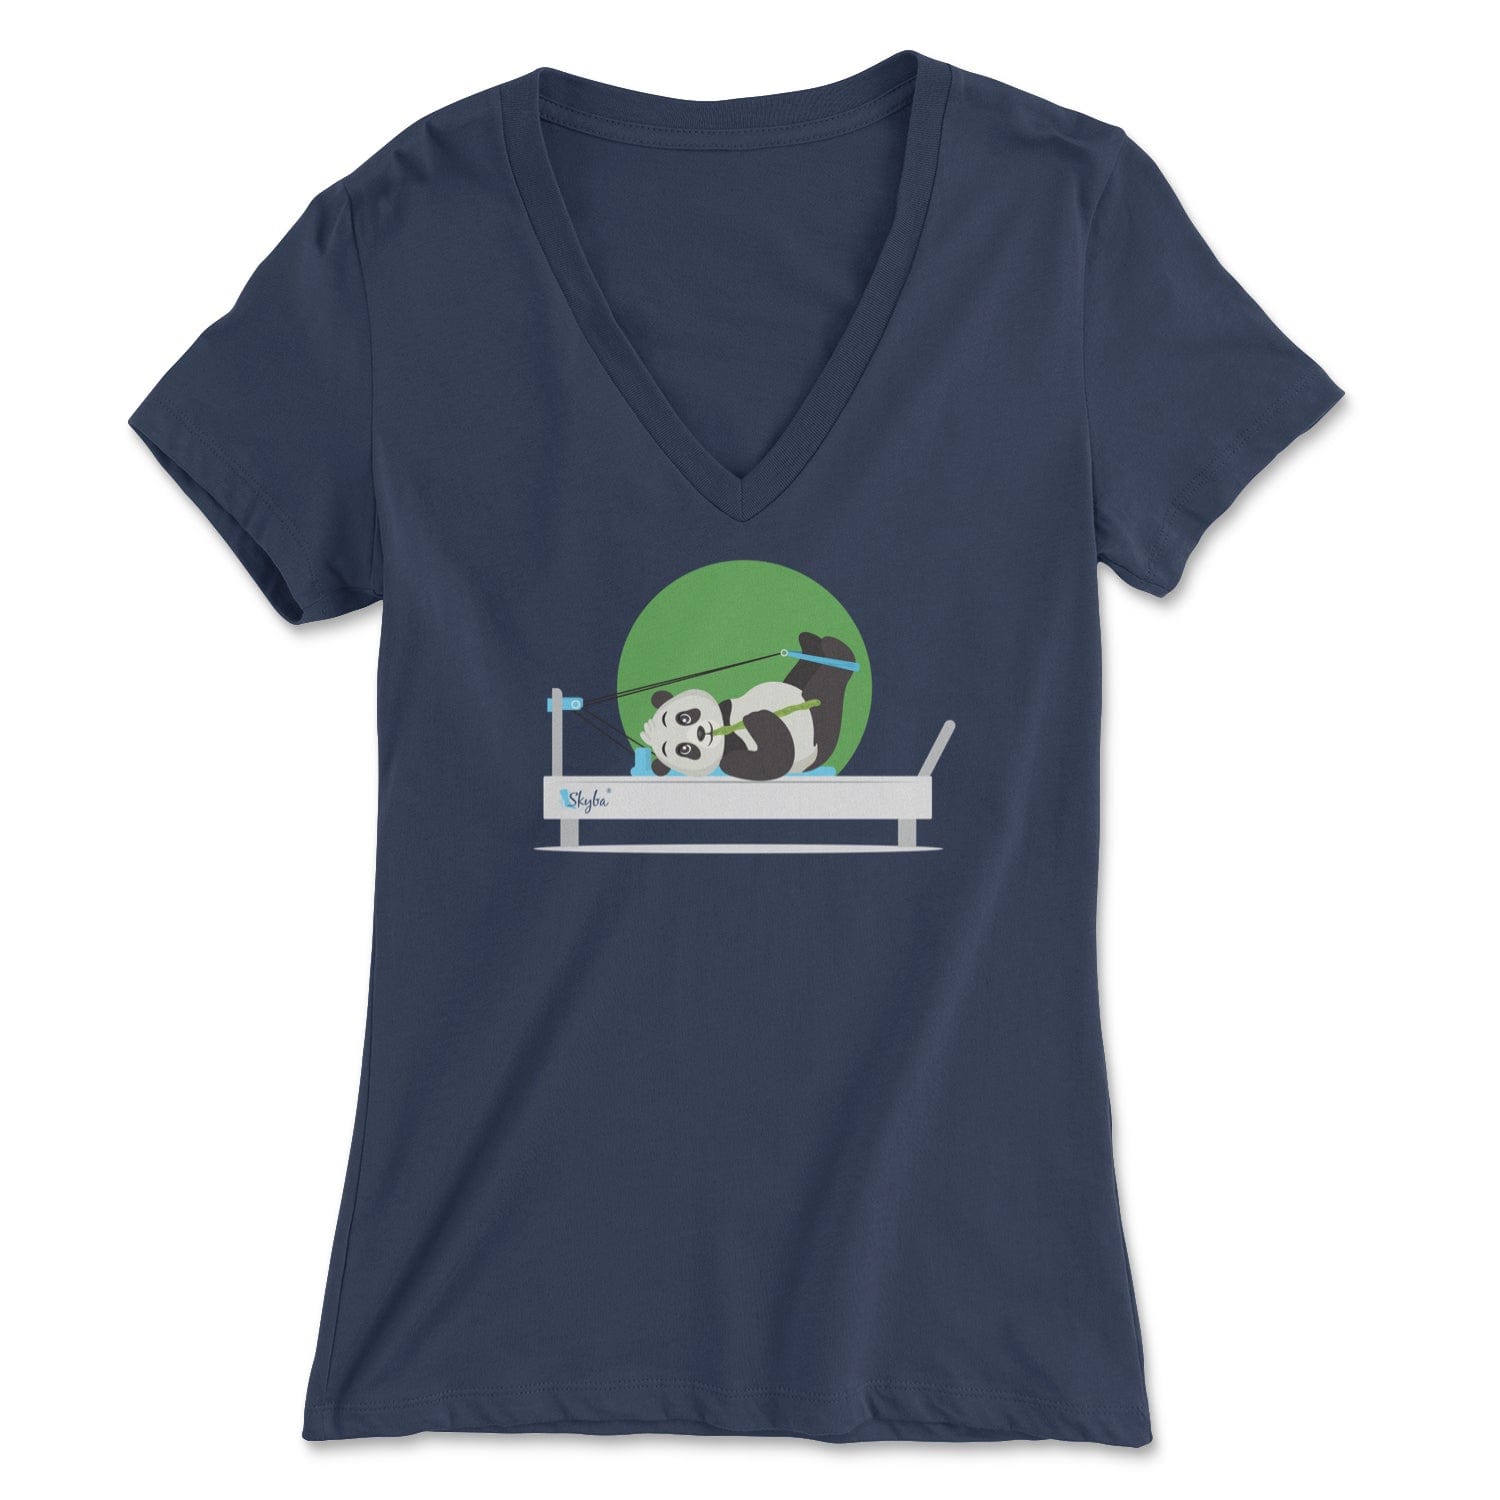 Hungry Panda on the Reformer - Women's V-Neck Tee Skyba Print Material